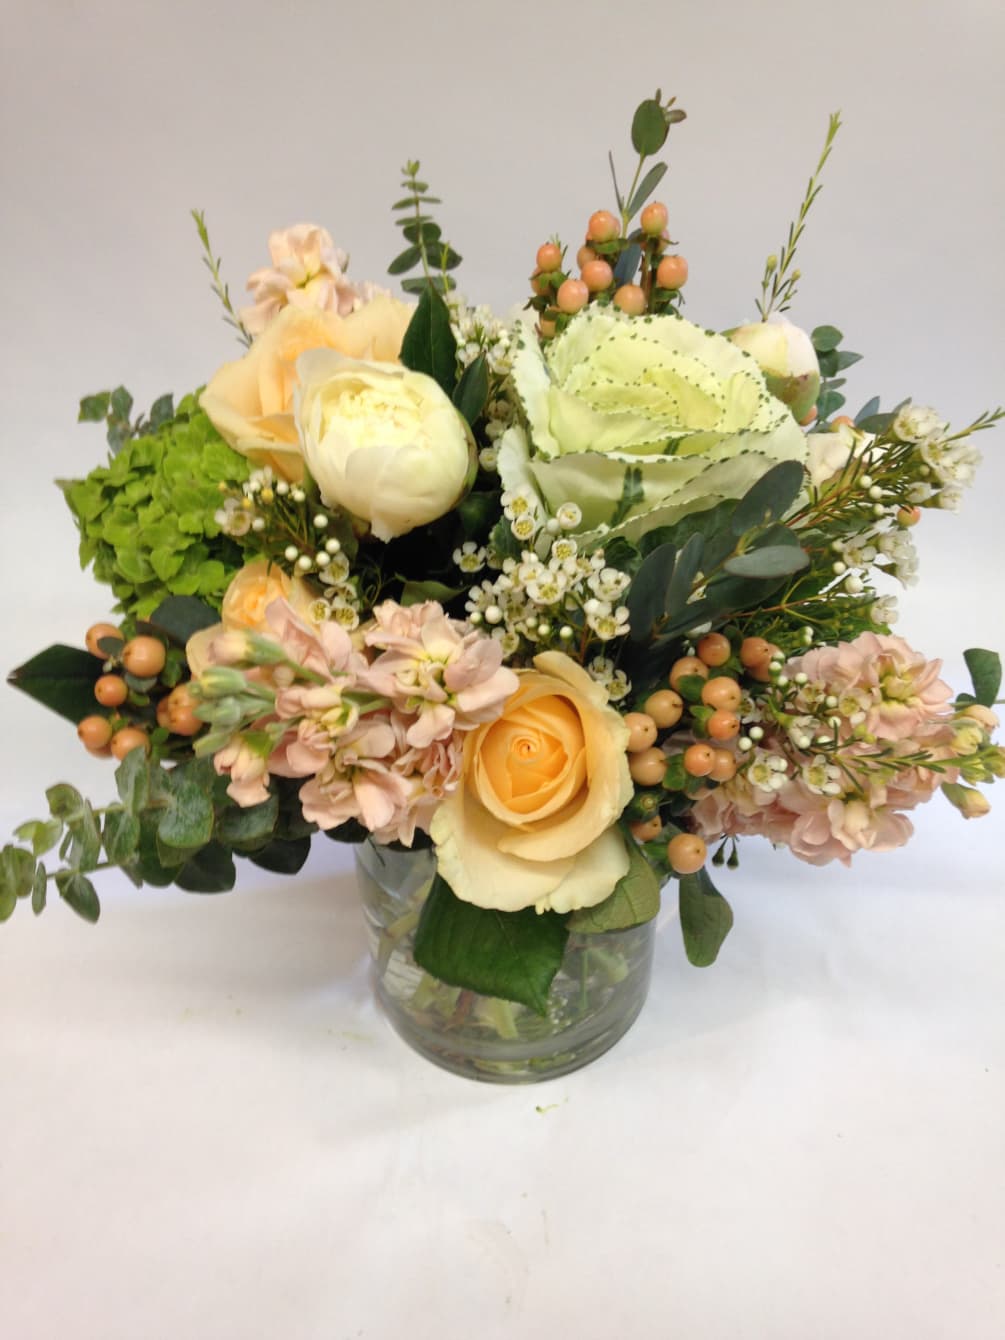 This golden and peach bouquet comes complete with roses, stock,  hydrangea